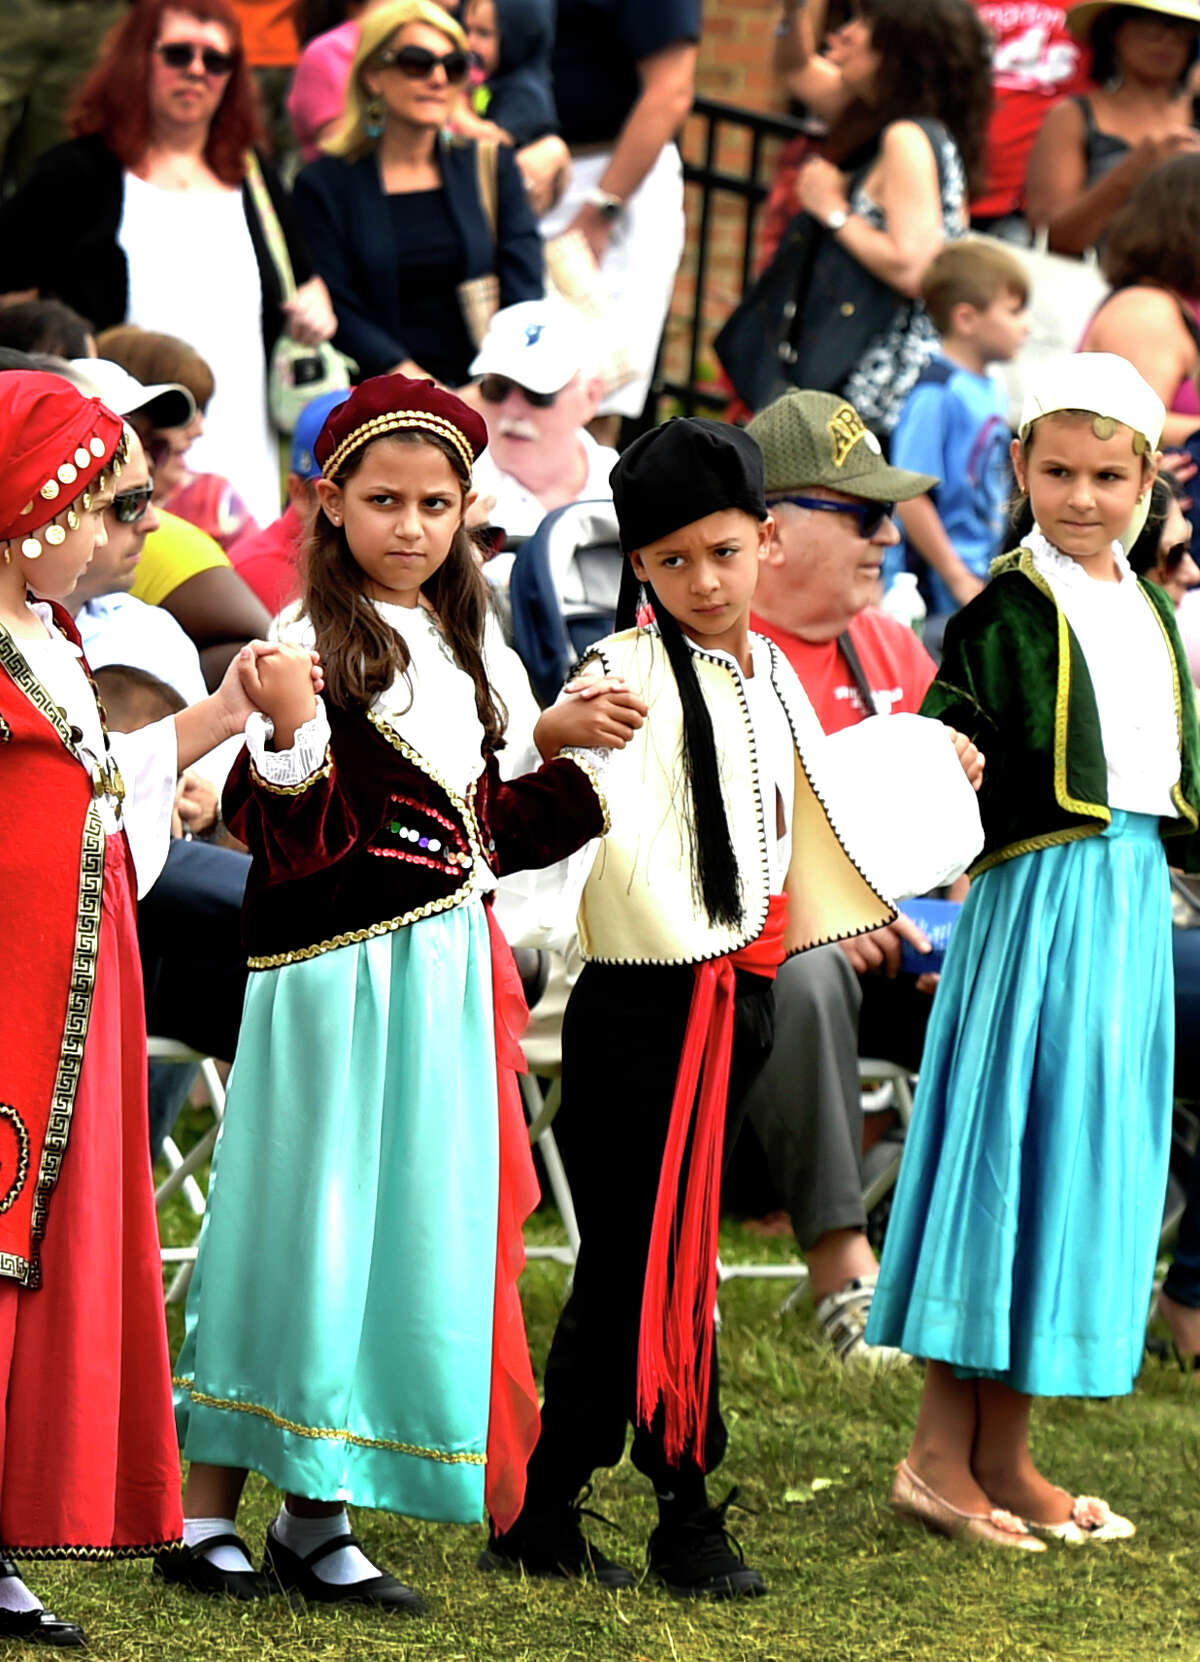 Orange, Connecticut - Sunday, September 1, 2019: Members of the Junior Odyssey Dancers, ages 7-10, perform during the St. Barbara Greek Orthodox Church 39th Annual Greek Festival Odyssey 2019 Sunday in Orange. The Labor Day weekend 4-day event of Hellenic traditions include all types of Greek culinary delights cooked on the festival grounds, Greek dancing and dance lessons, music, Greek cooking demonstrations, a gourmet Greek grocery, presentations on Greek Orthodoxy, a tag sale, children's activities rides, games and magic shows.